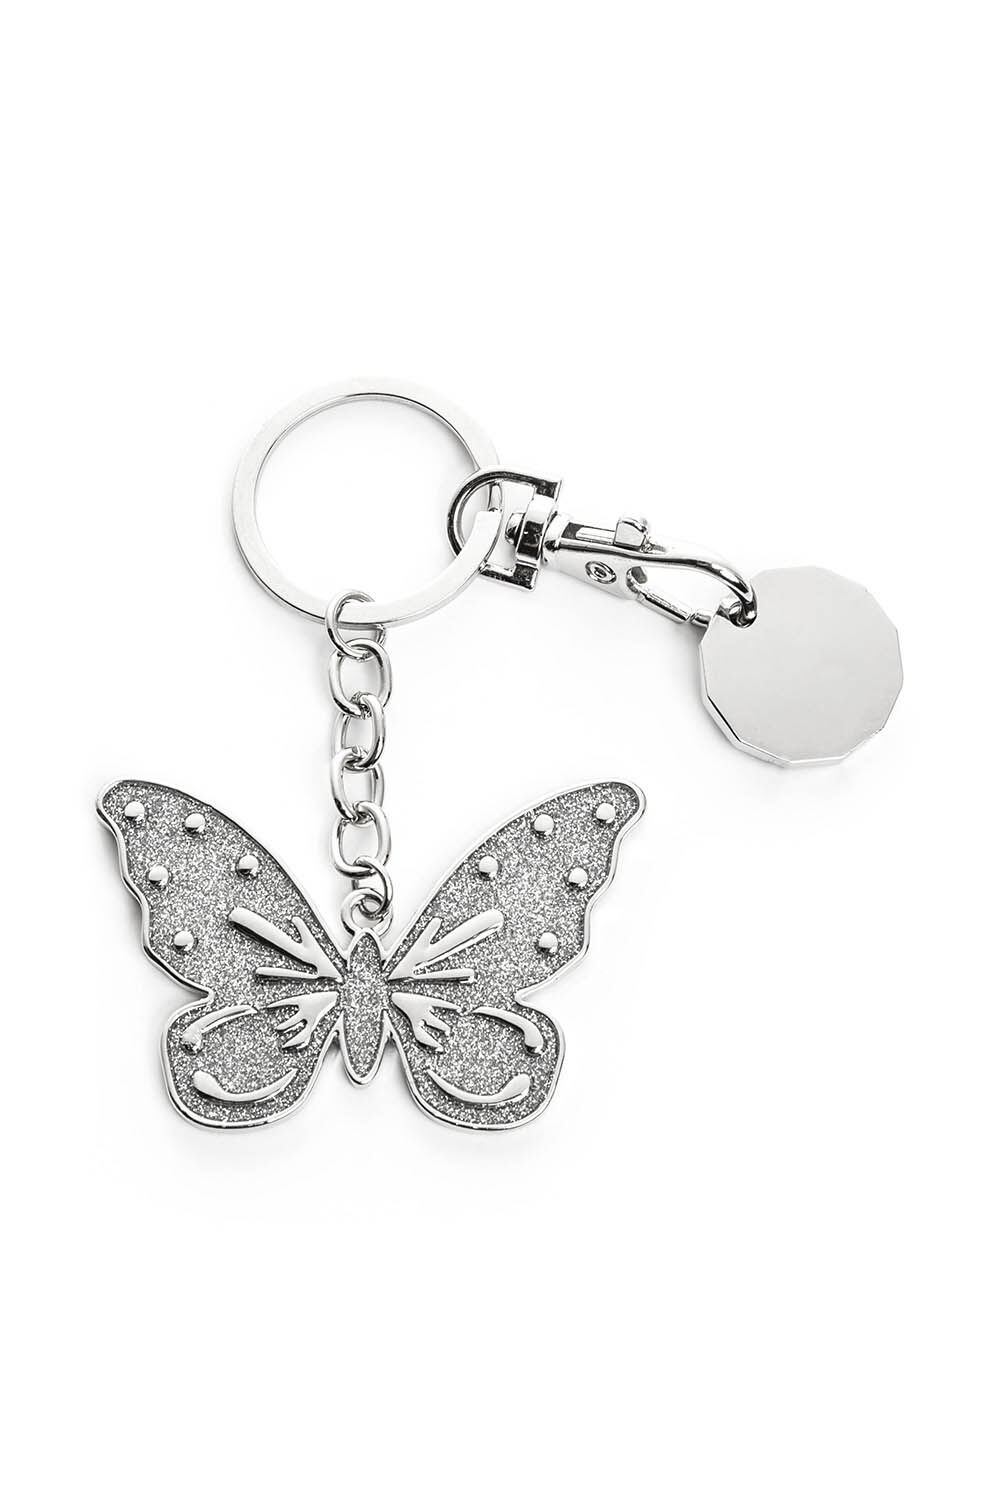 Butterfly Rare Key Chain Yellow Real Pendant In Clear Resin Moth Key ring Charm 